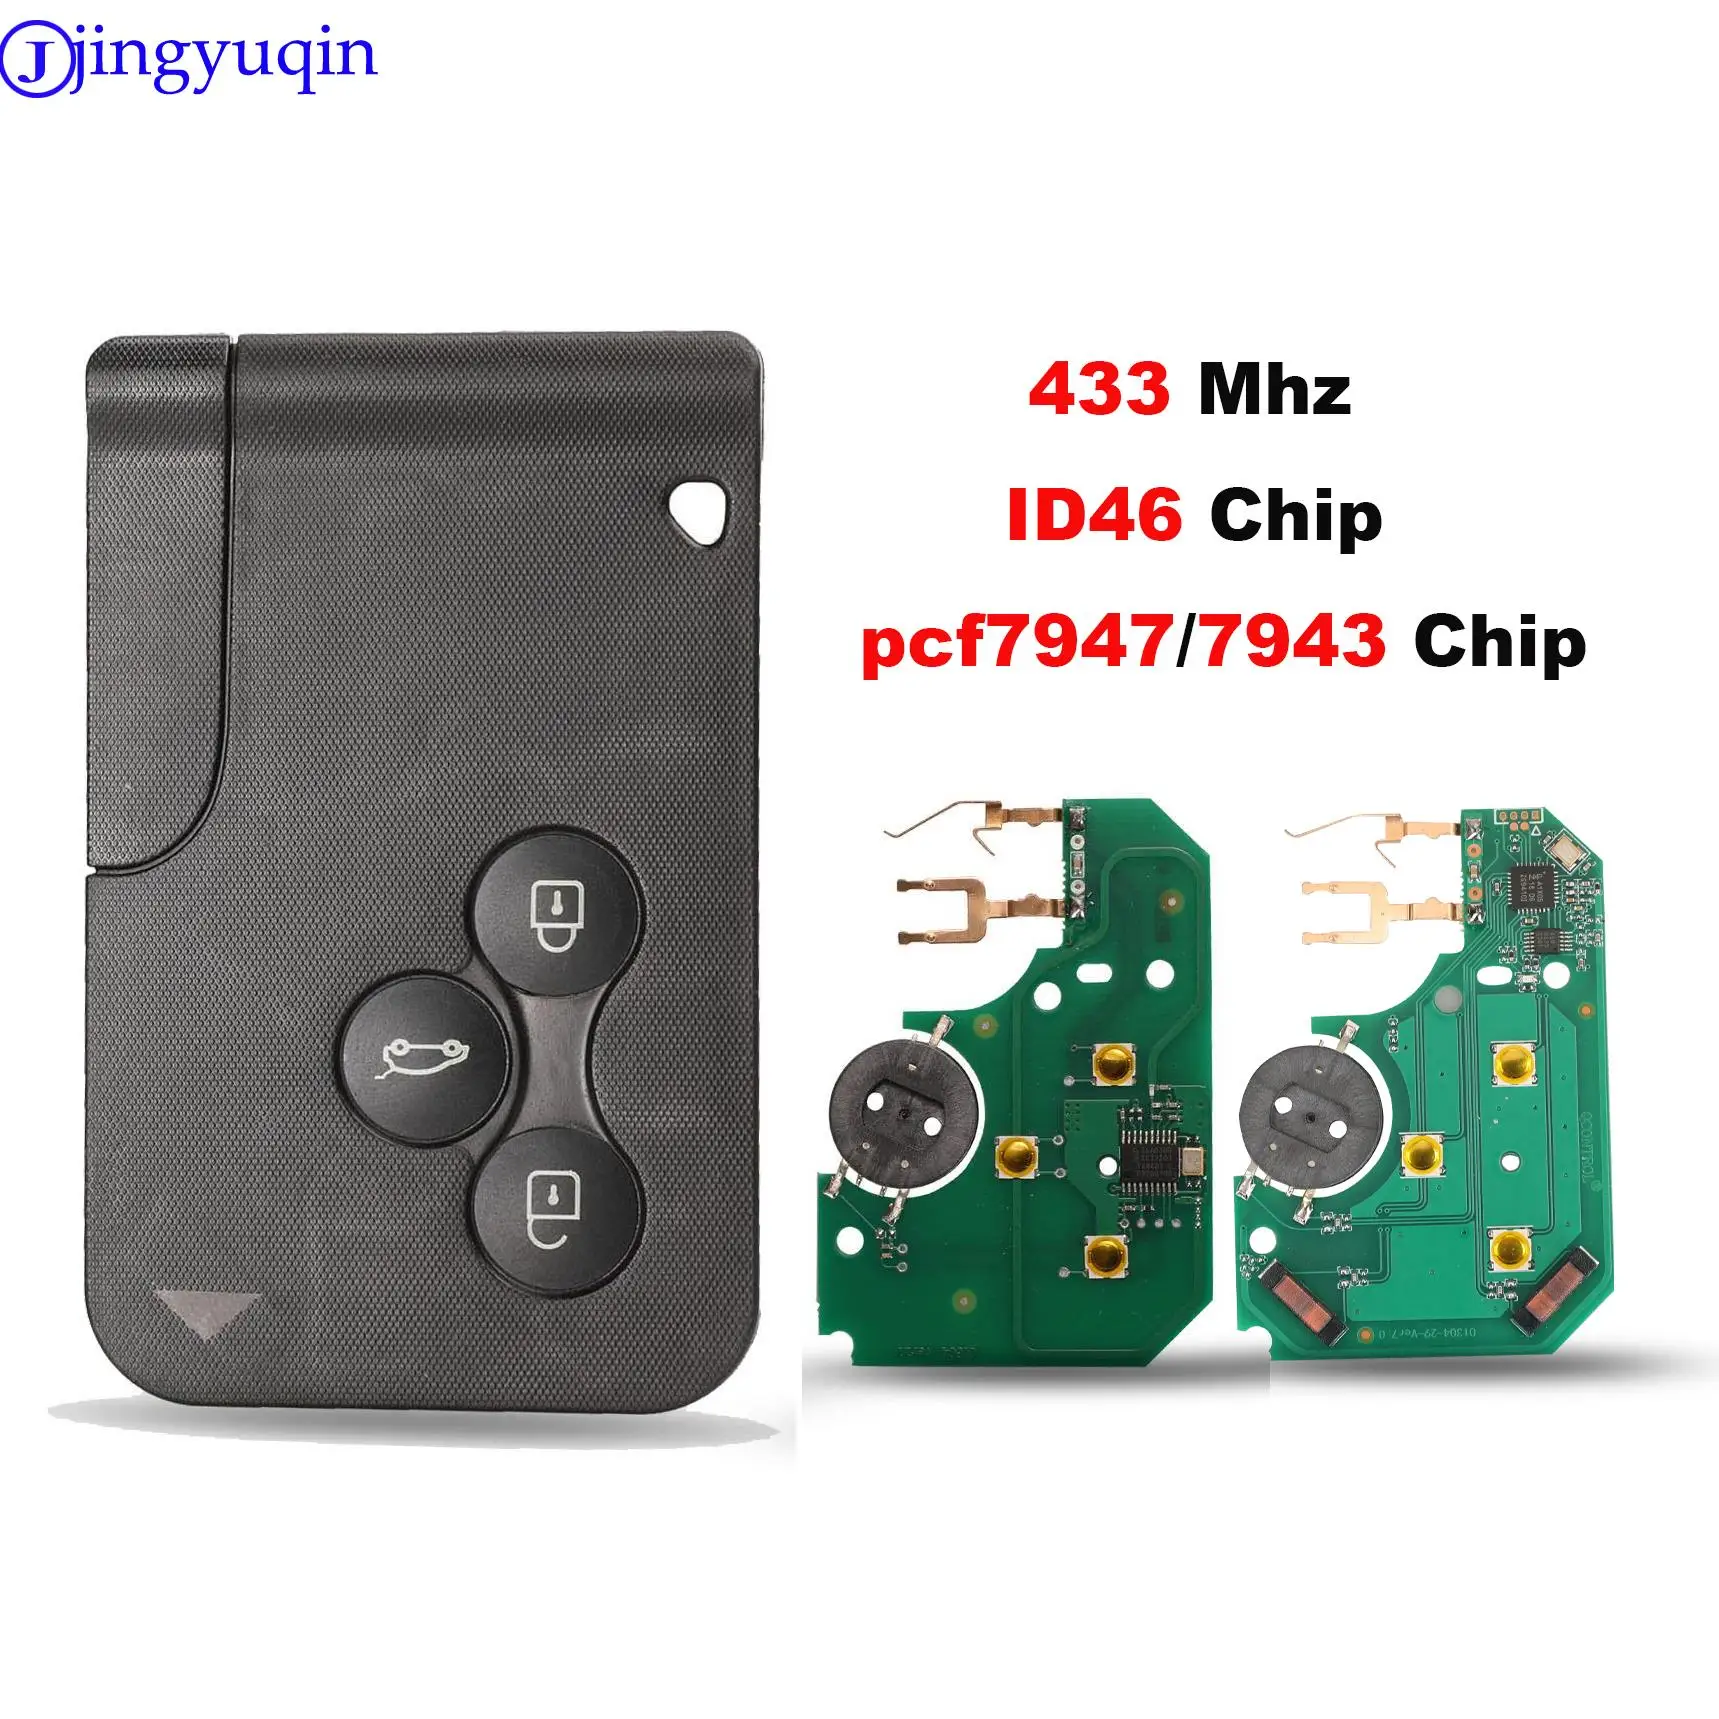 

jingyuqin 3 Button 433Mhz ID46 PCF7947/7943 Chip & Insert Small Blade Remote Smart Key Card for Renault Megane Scenic Grand